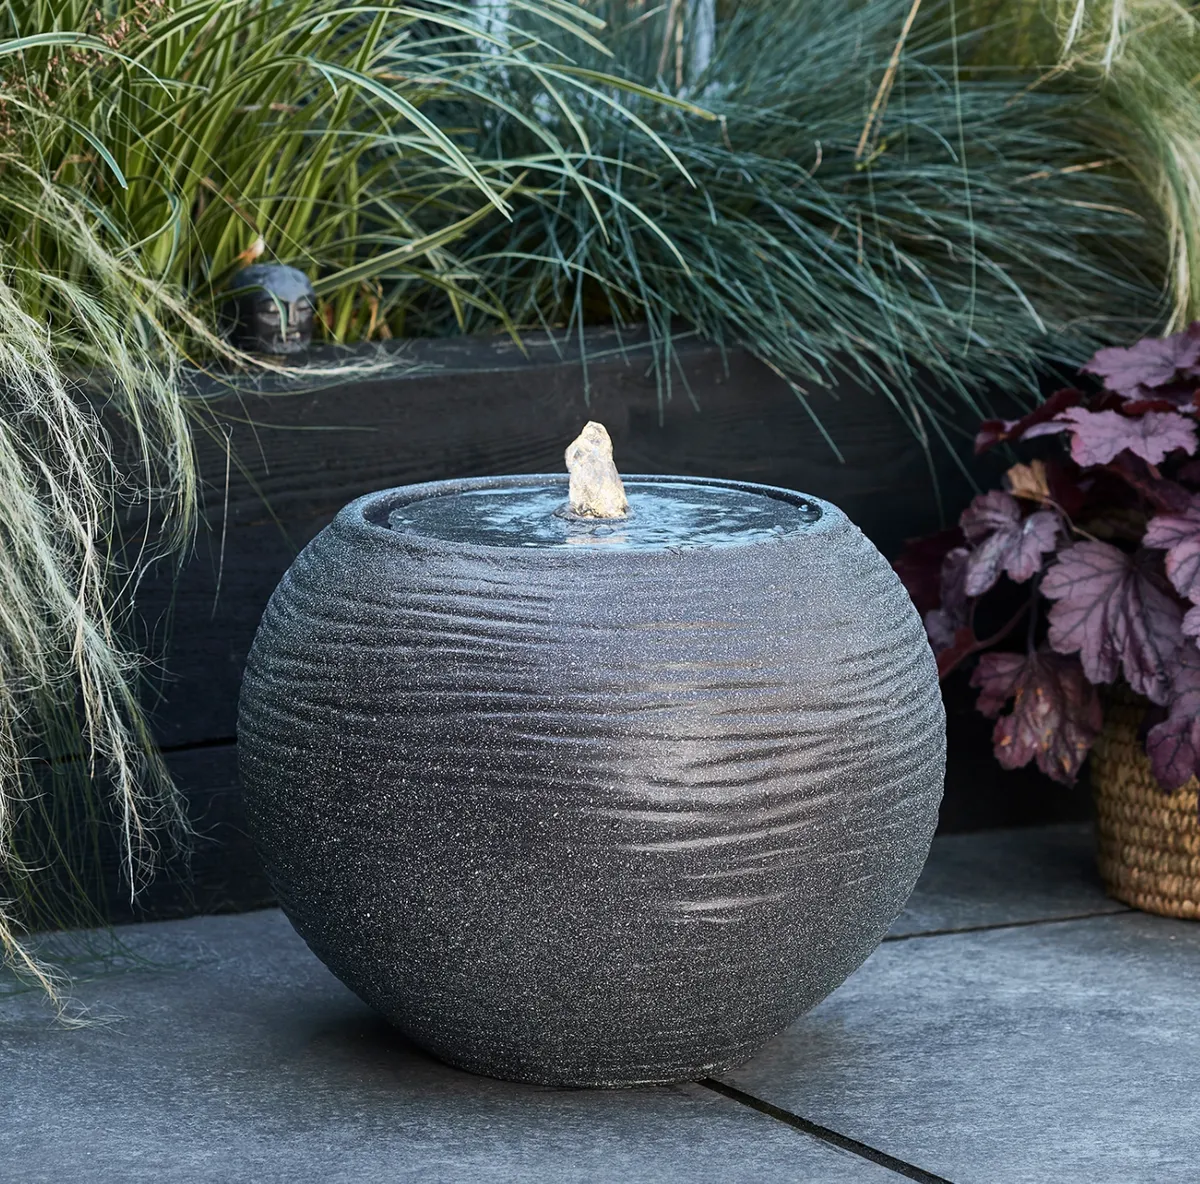 Stone Sphere Water Feature, £159.99, Lights4fun